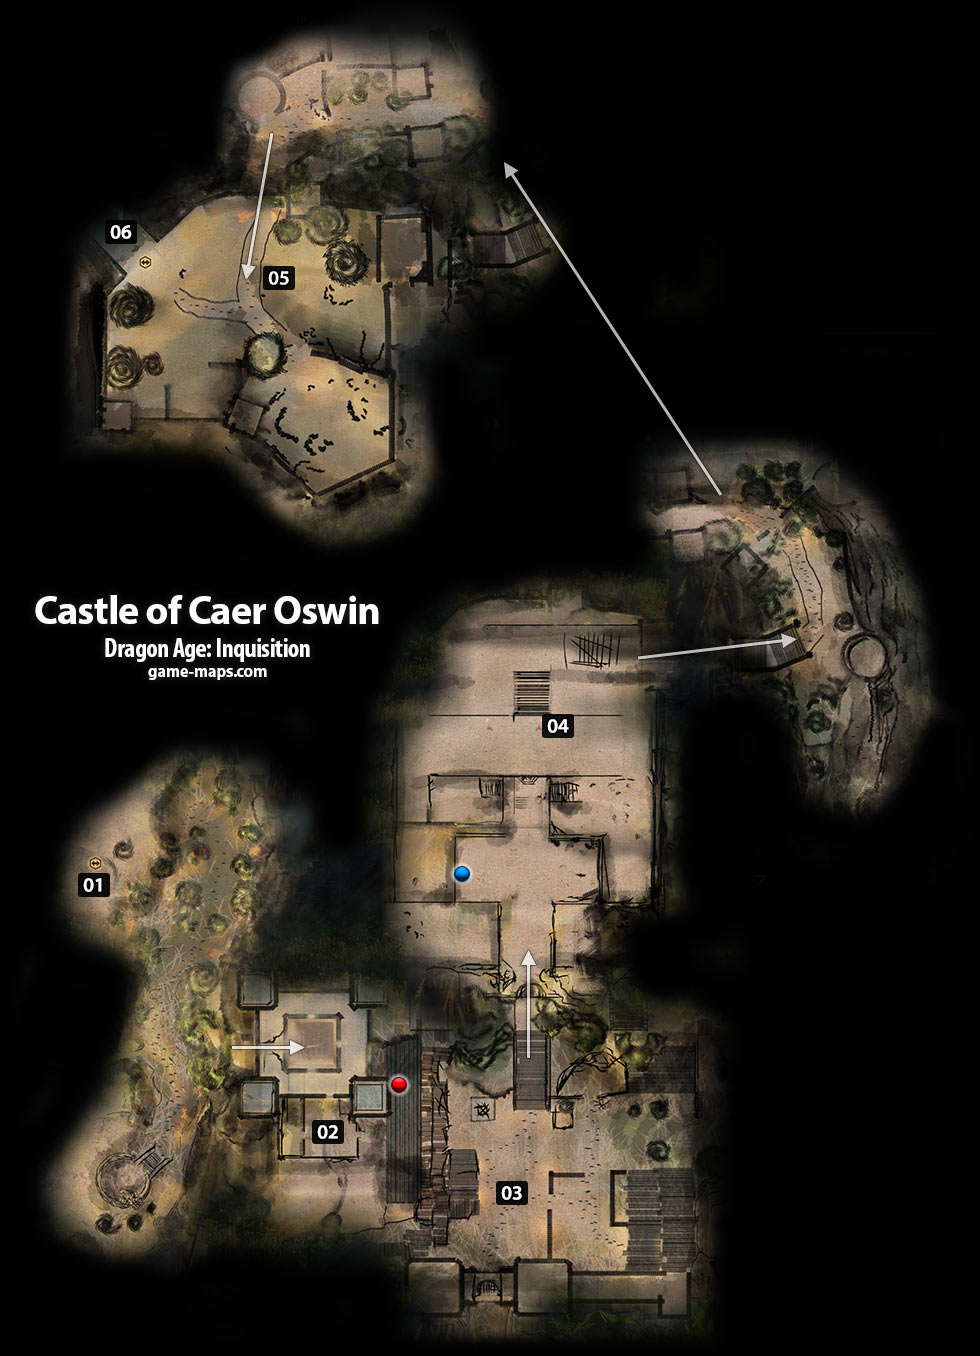 Map of Caer Oswin Castle - Dragon Age: Inquisition